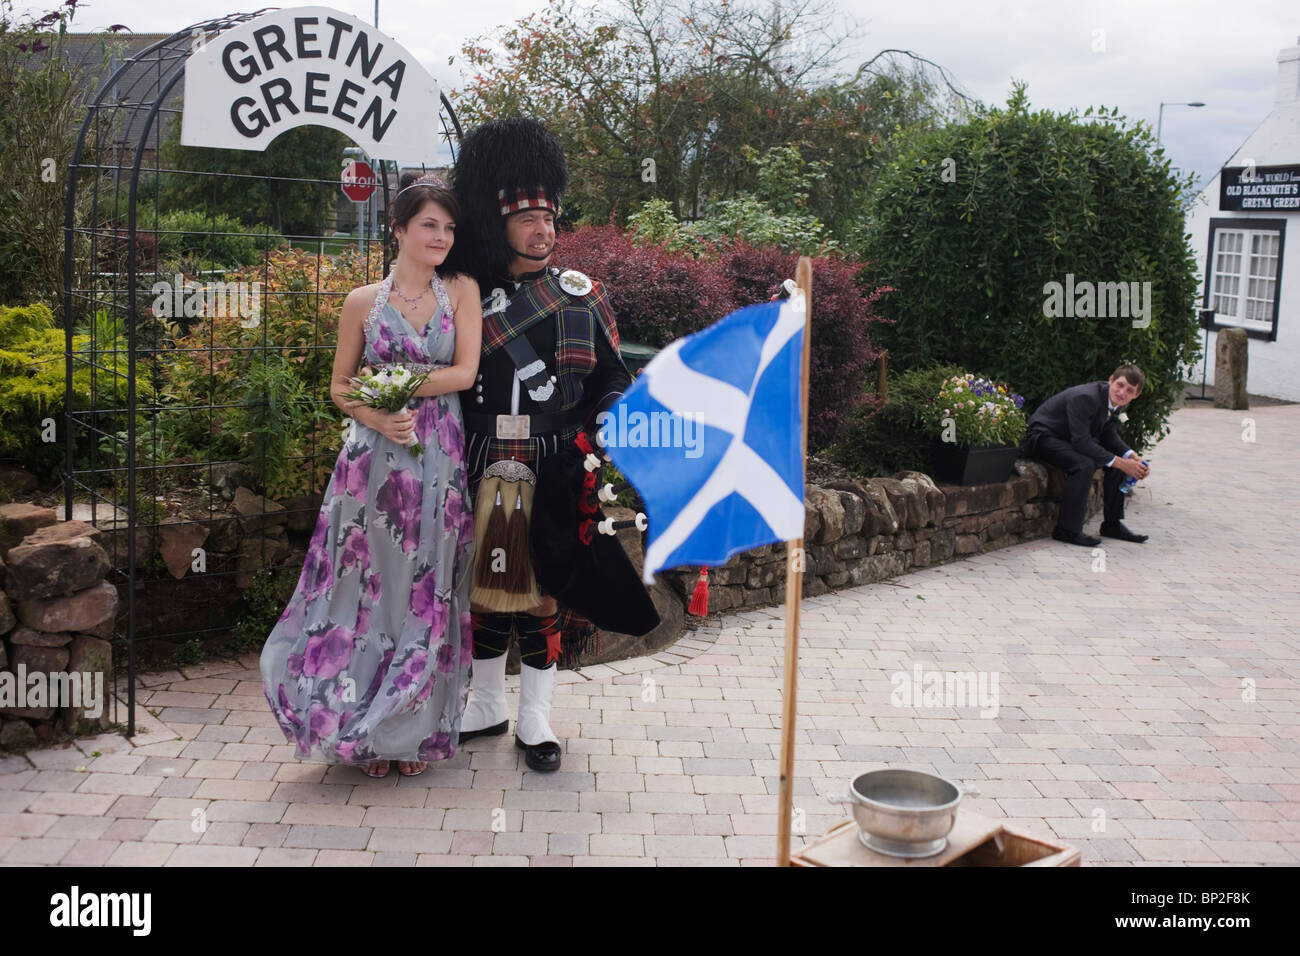 Family stands with Scottish piper at Gretna Green, where Britain's wedding couples converge on for a quickie marriage. Stock Photo